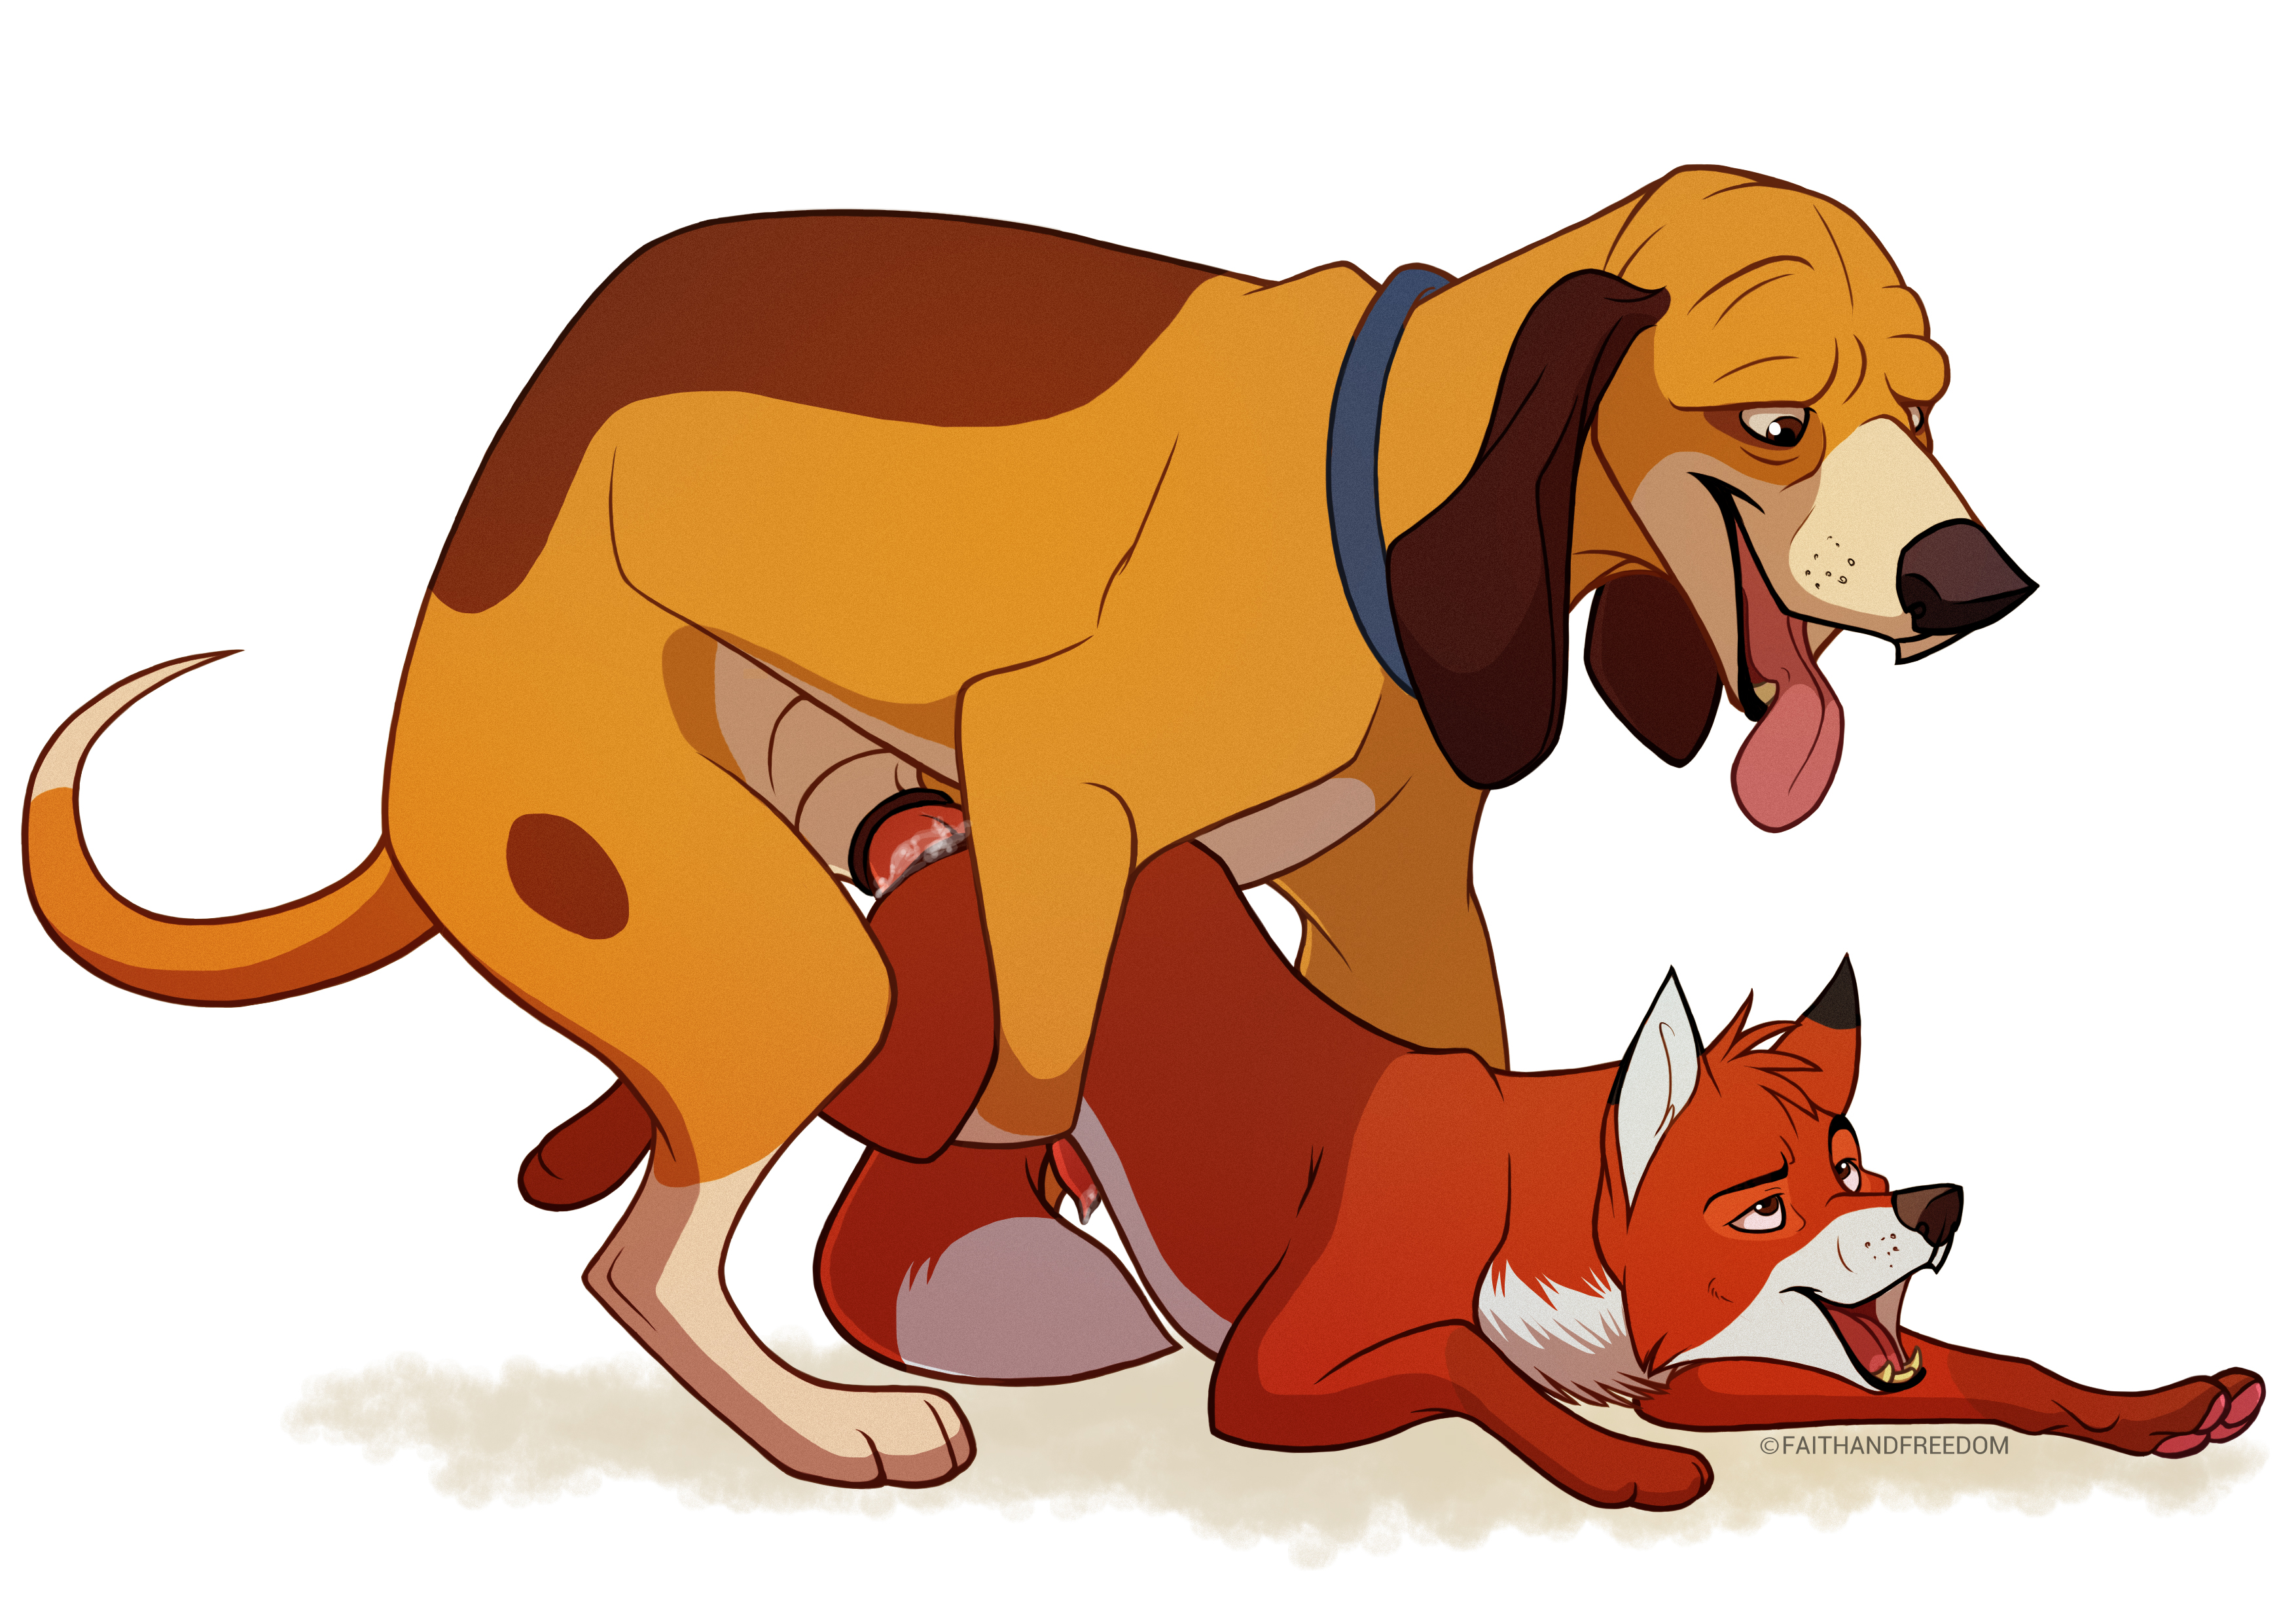 Padfoot and hound